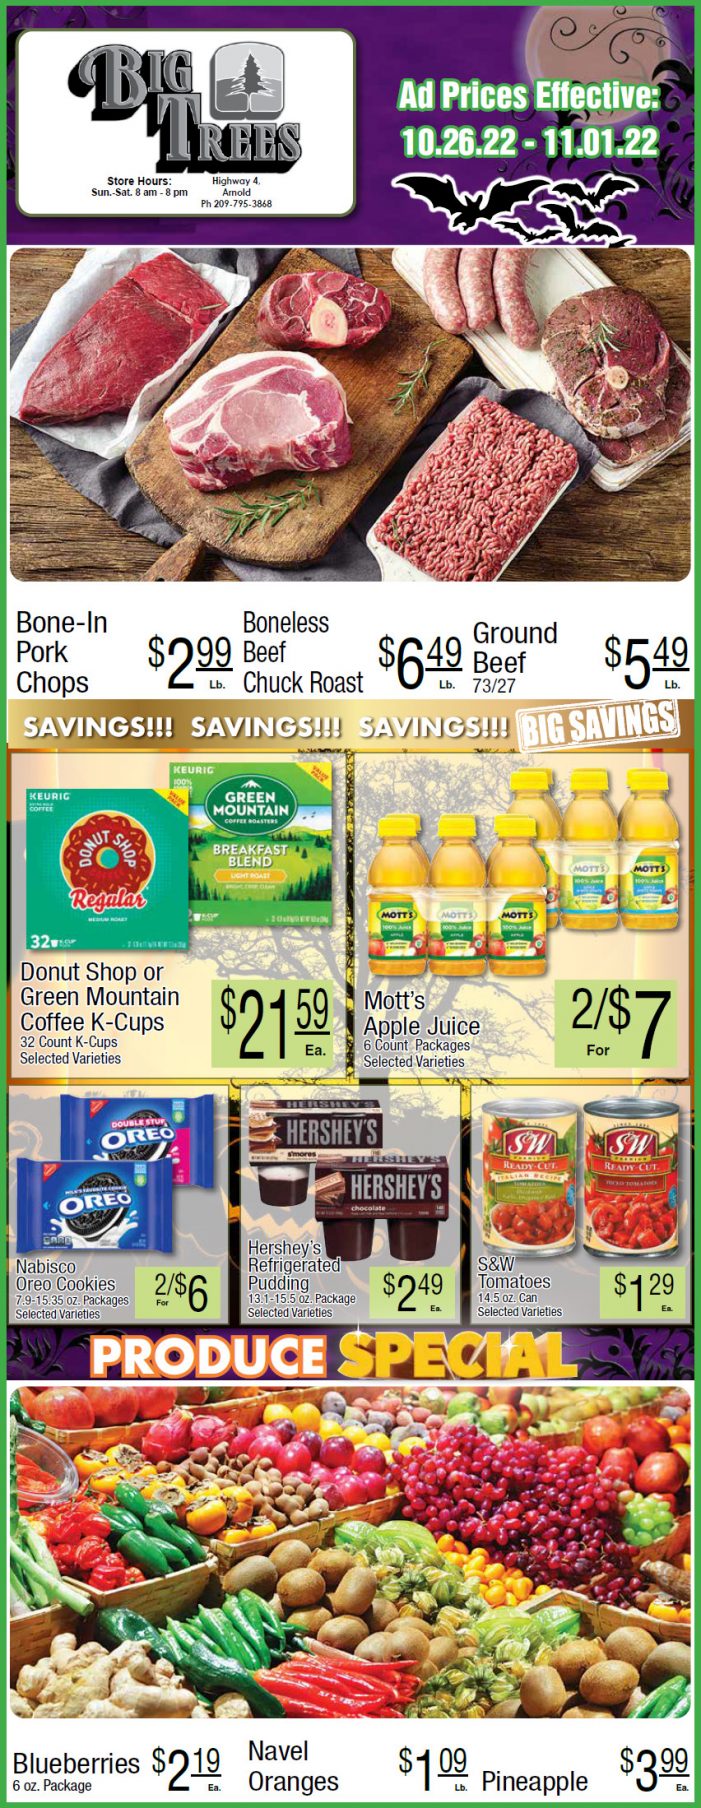 Big Trees Market Weekly Ad & Grocery Specials October Through November 1st!  Shop Local & Save!!